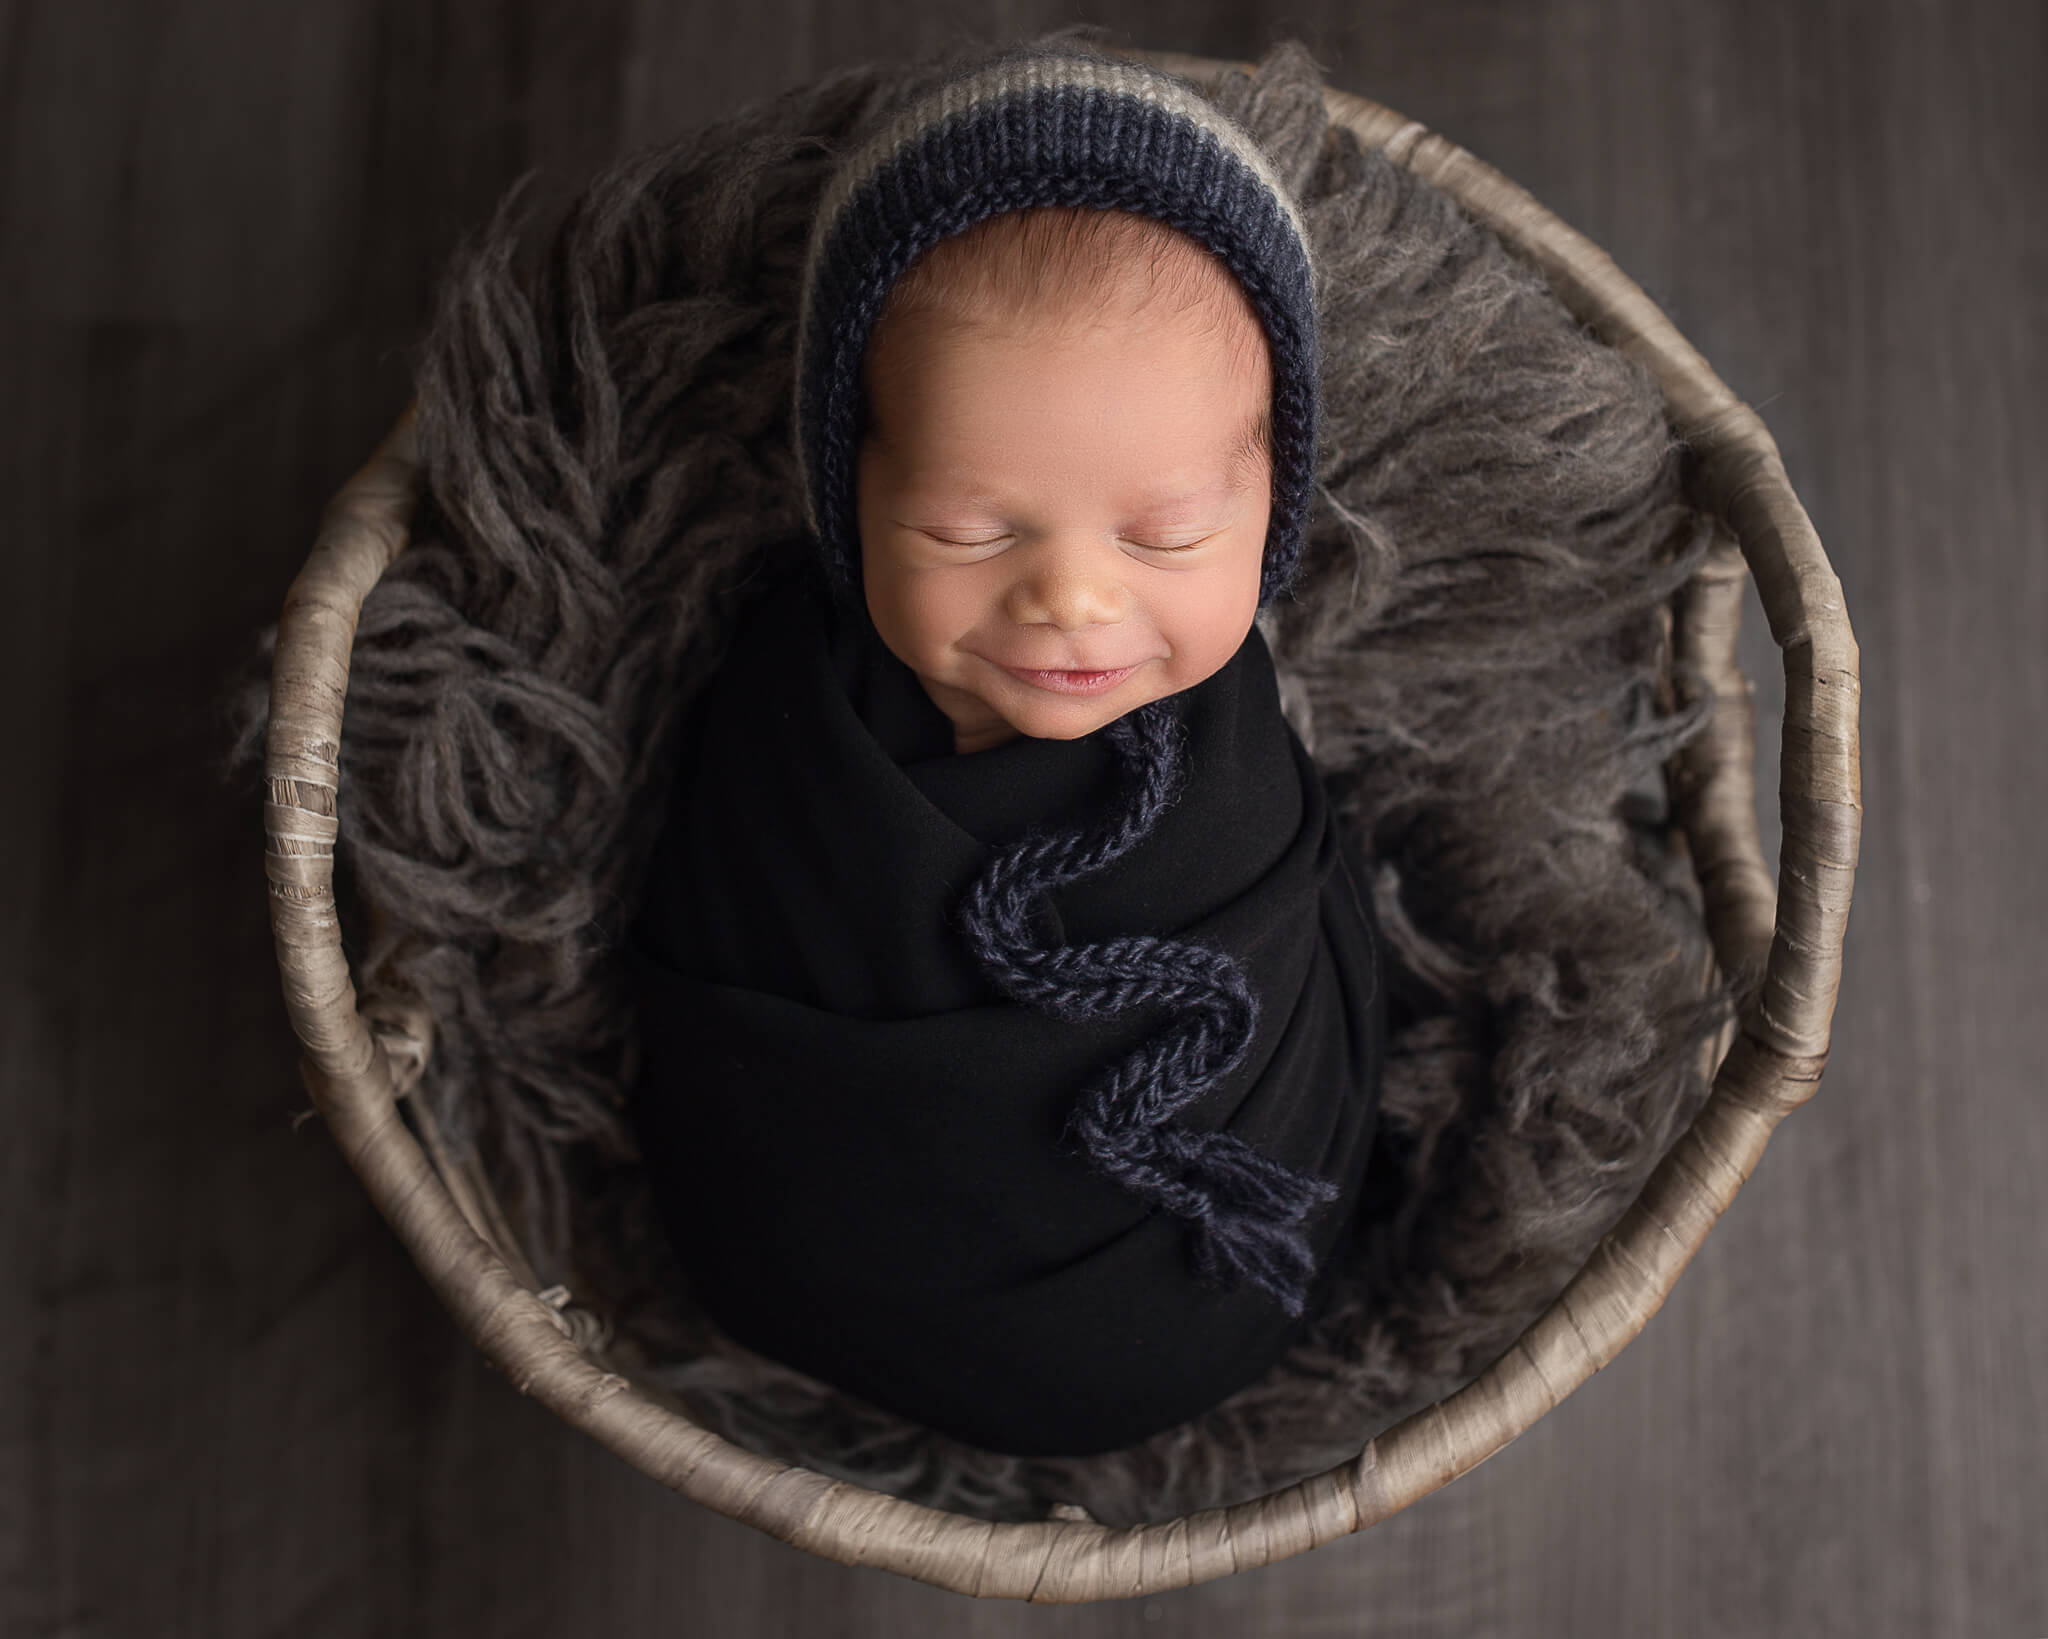 cold symptoms in babies in blog photo of sleepy, smiling baby in a basket with fur blanket and black blanket